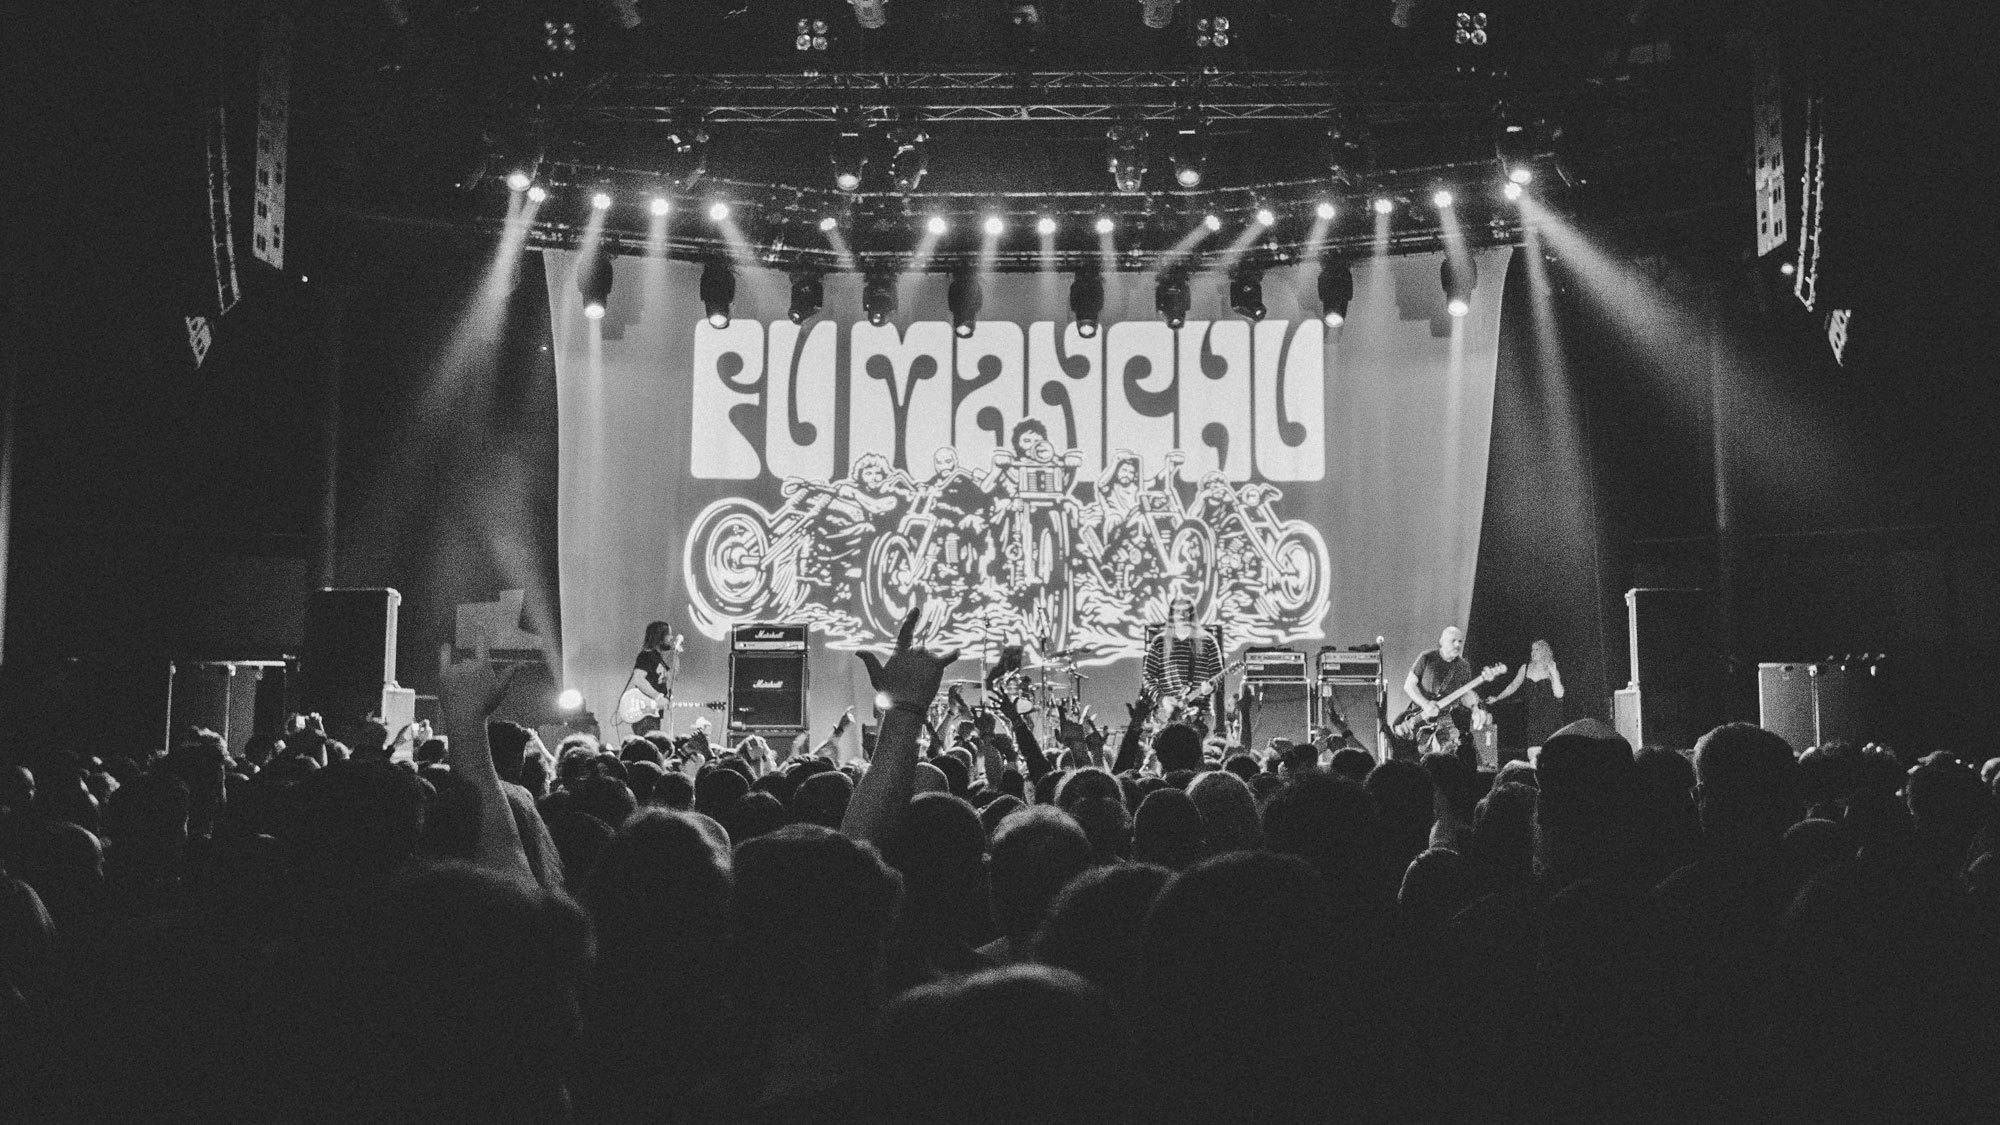 13 Things We Learned At Desertfest 2019